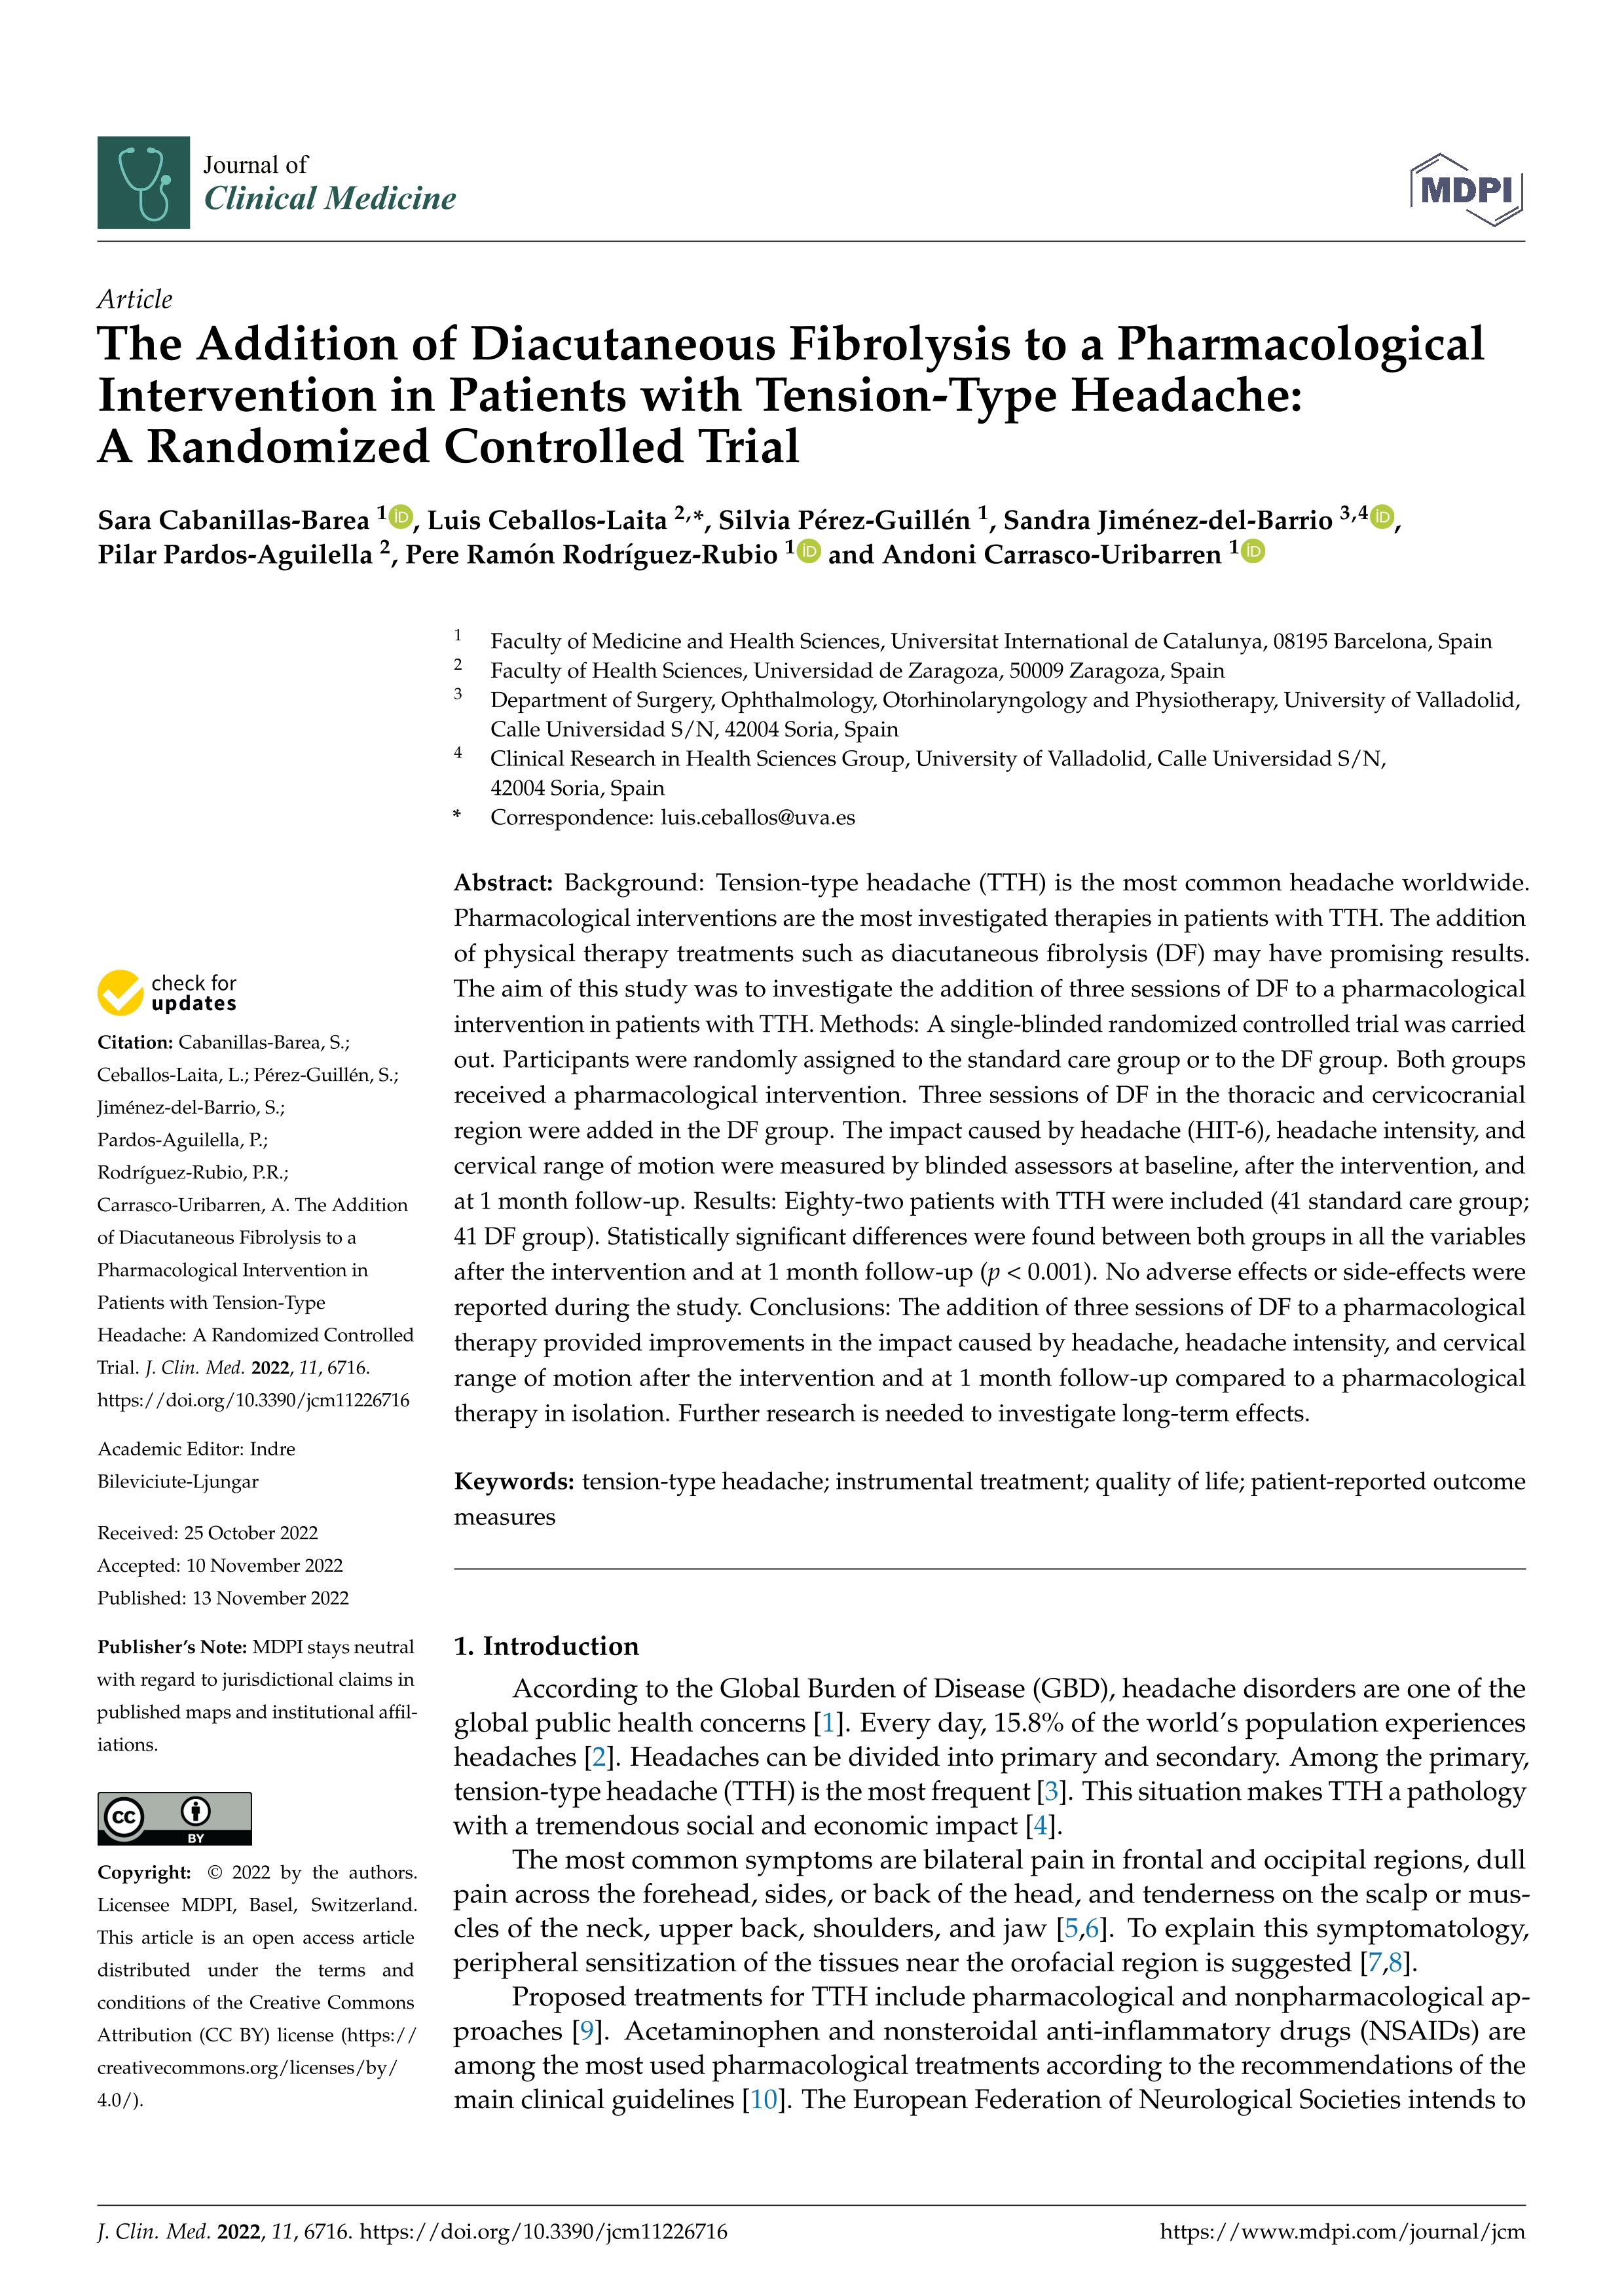 The Addition of Diacutaneous Fibrolysis to a Pharmacological Intervention in Patients with Tension-Type Headache: A Randomized Controlled Trial